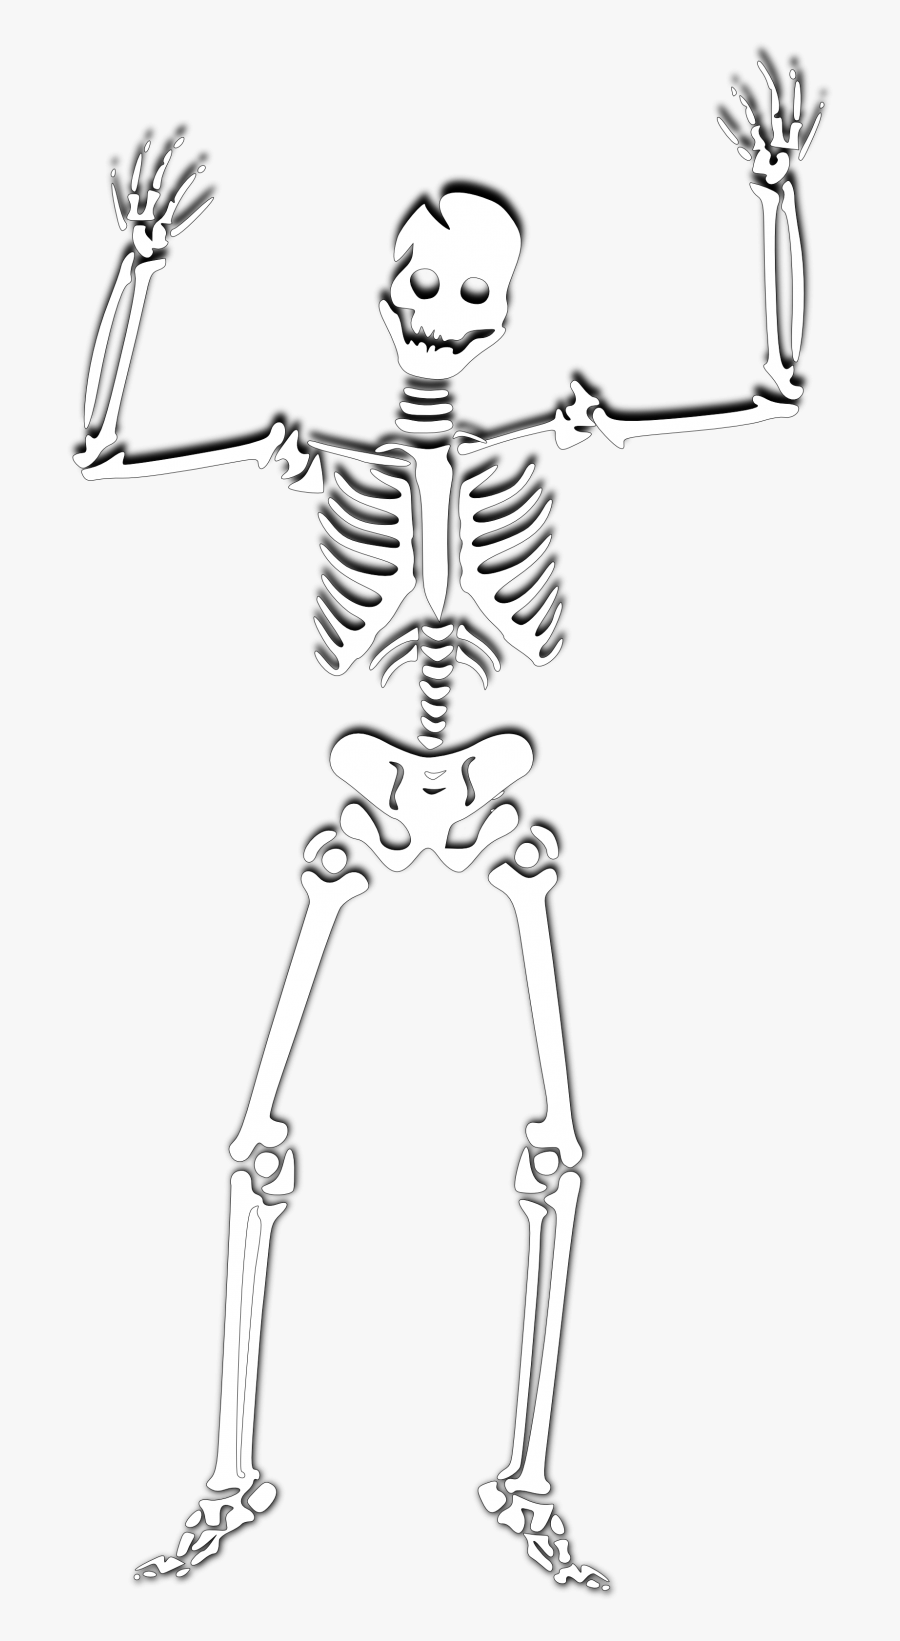 Skeleton With Hands Up, Transparent Clipart